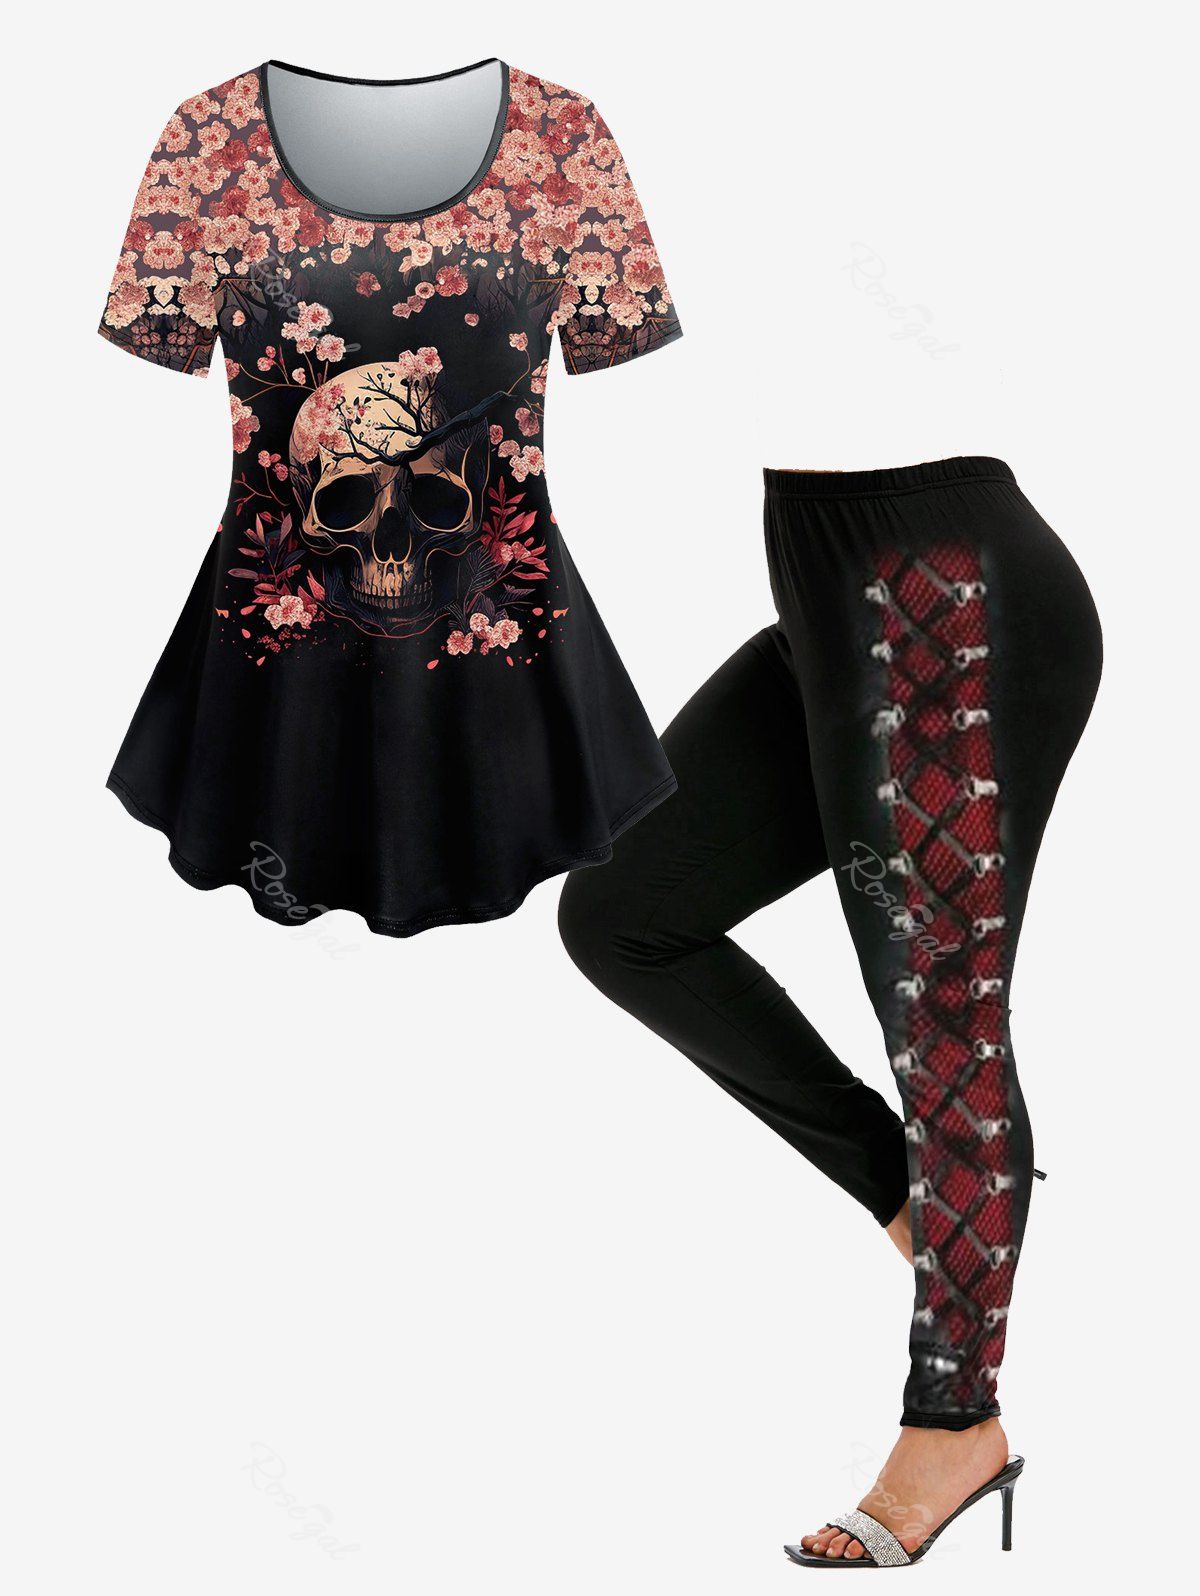 New Gothic Floral Skull Print Short Sleeve T-shirt And Gothic 3D Printed Leggings Gothic Outfit  